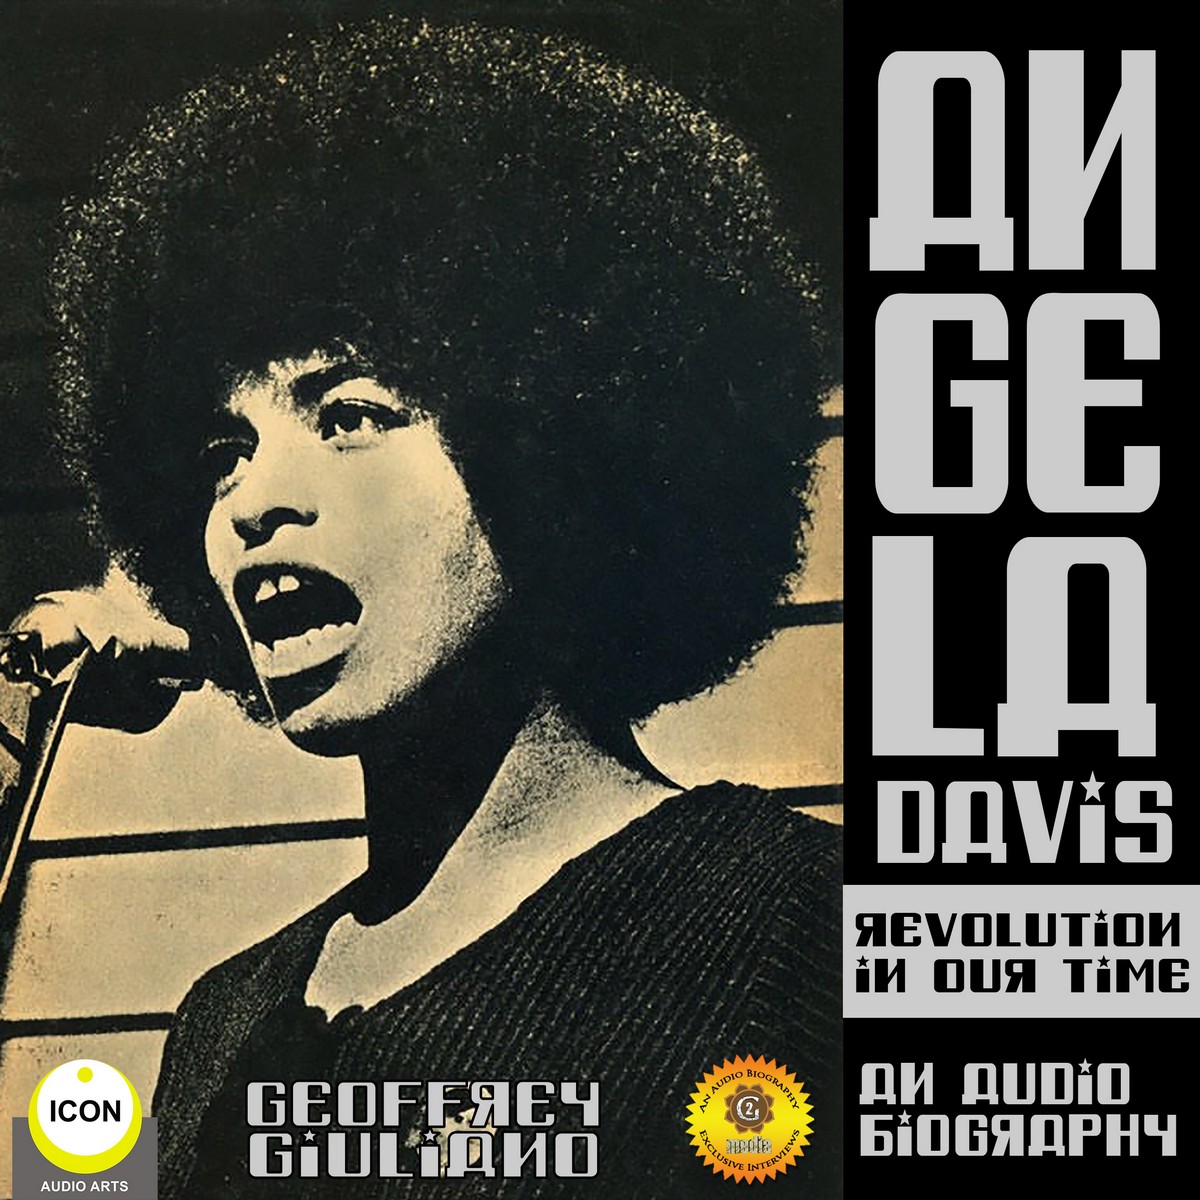 Angela Davis Revolution in Our Time – an Audio Biography